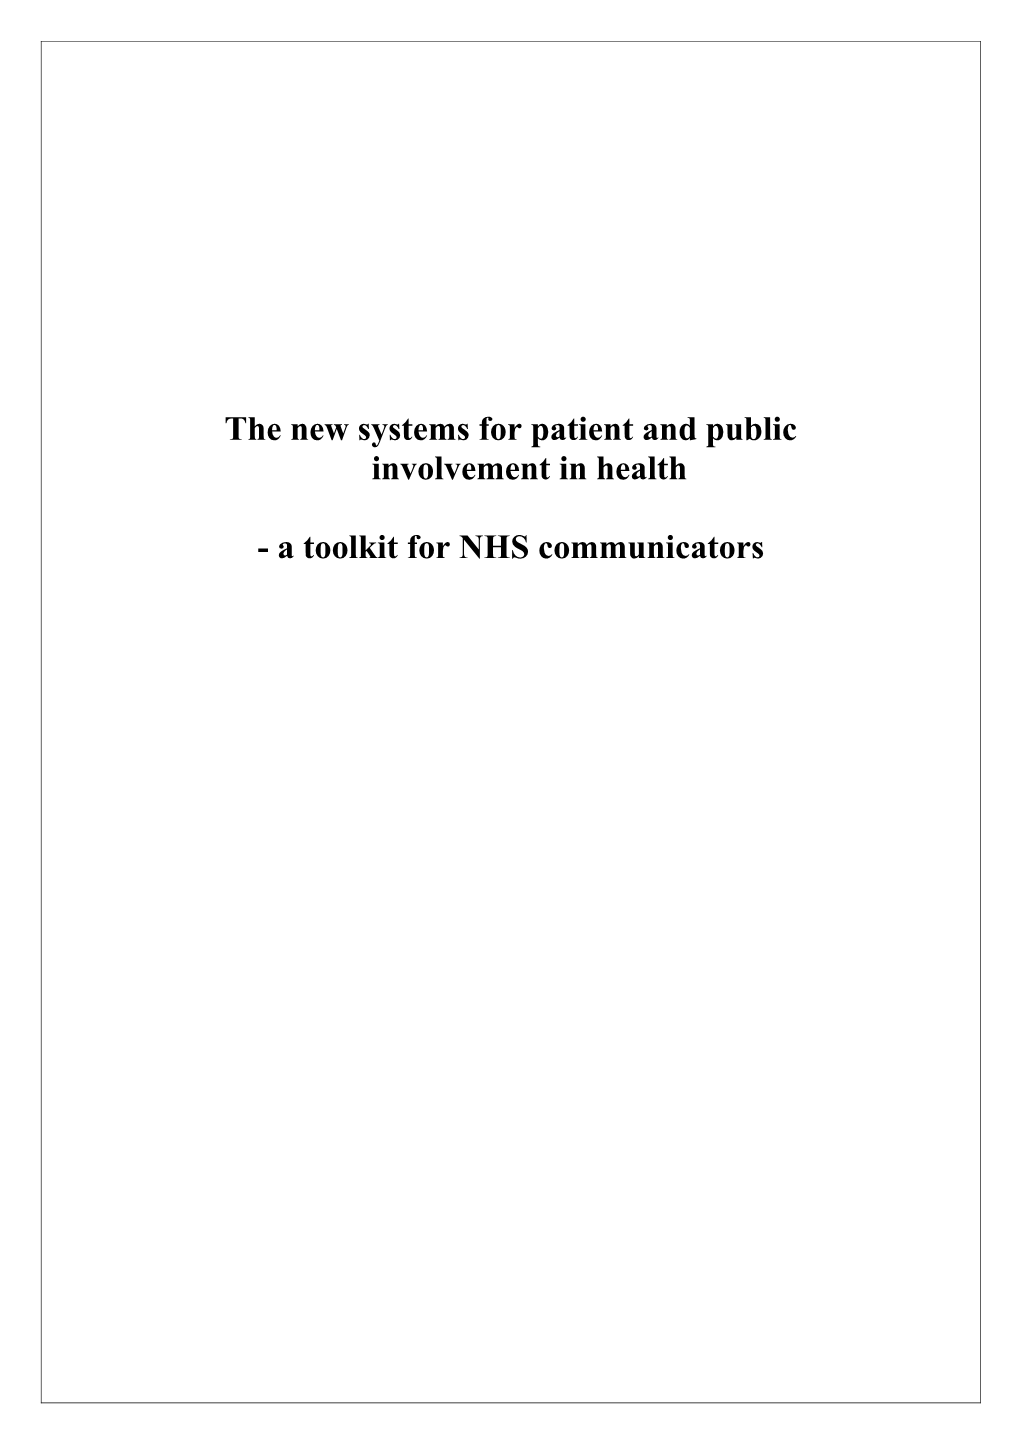 The New Systems for Patient and Public Involvement in Health